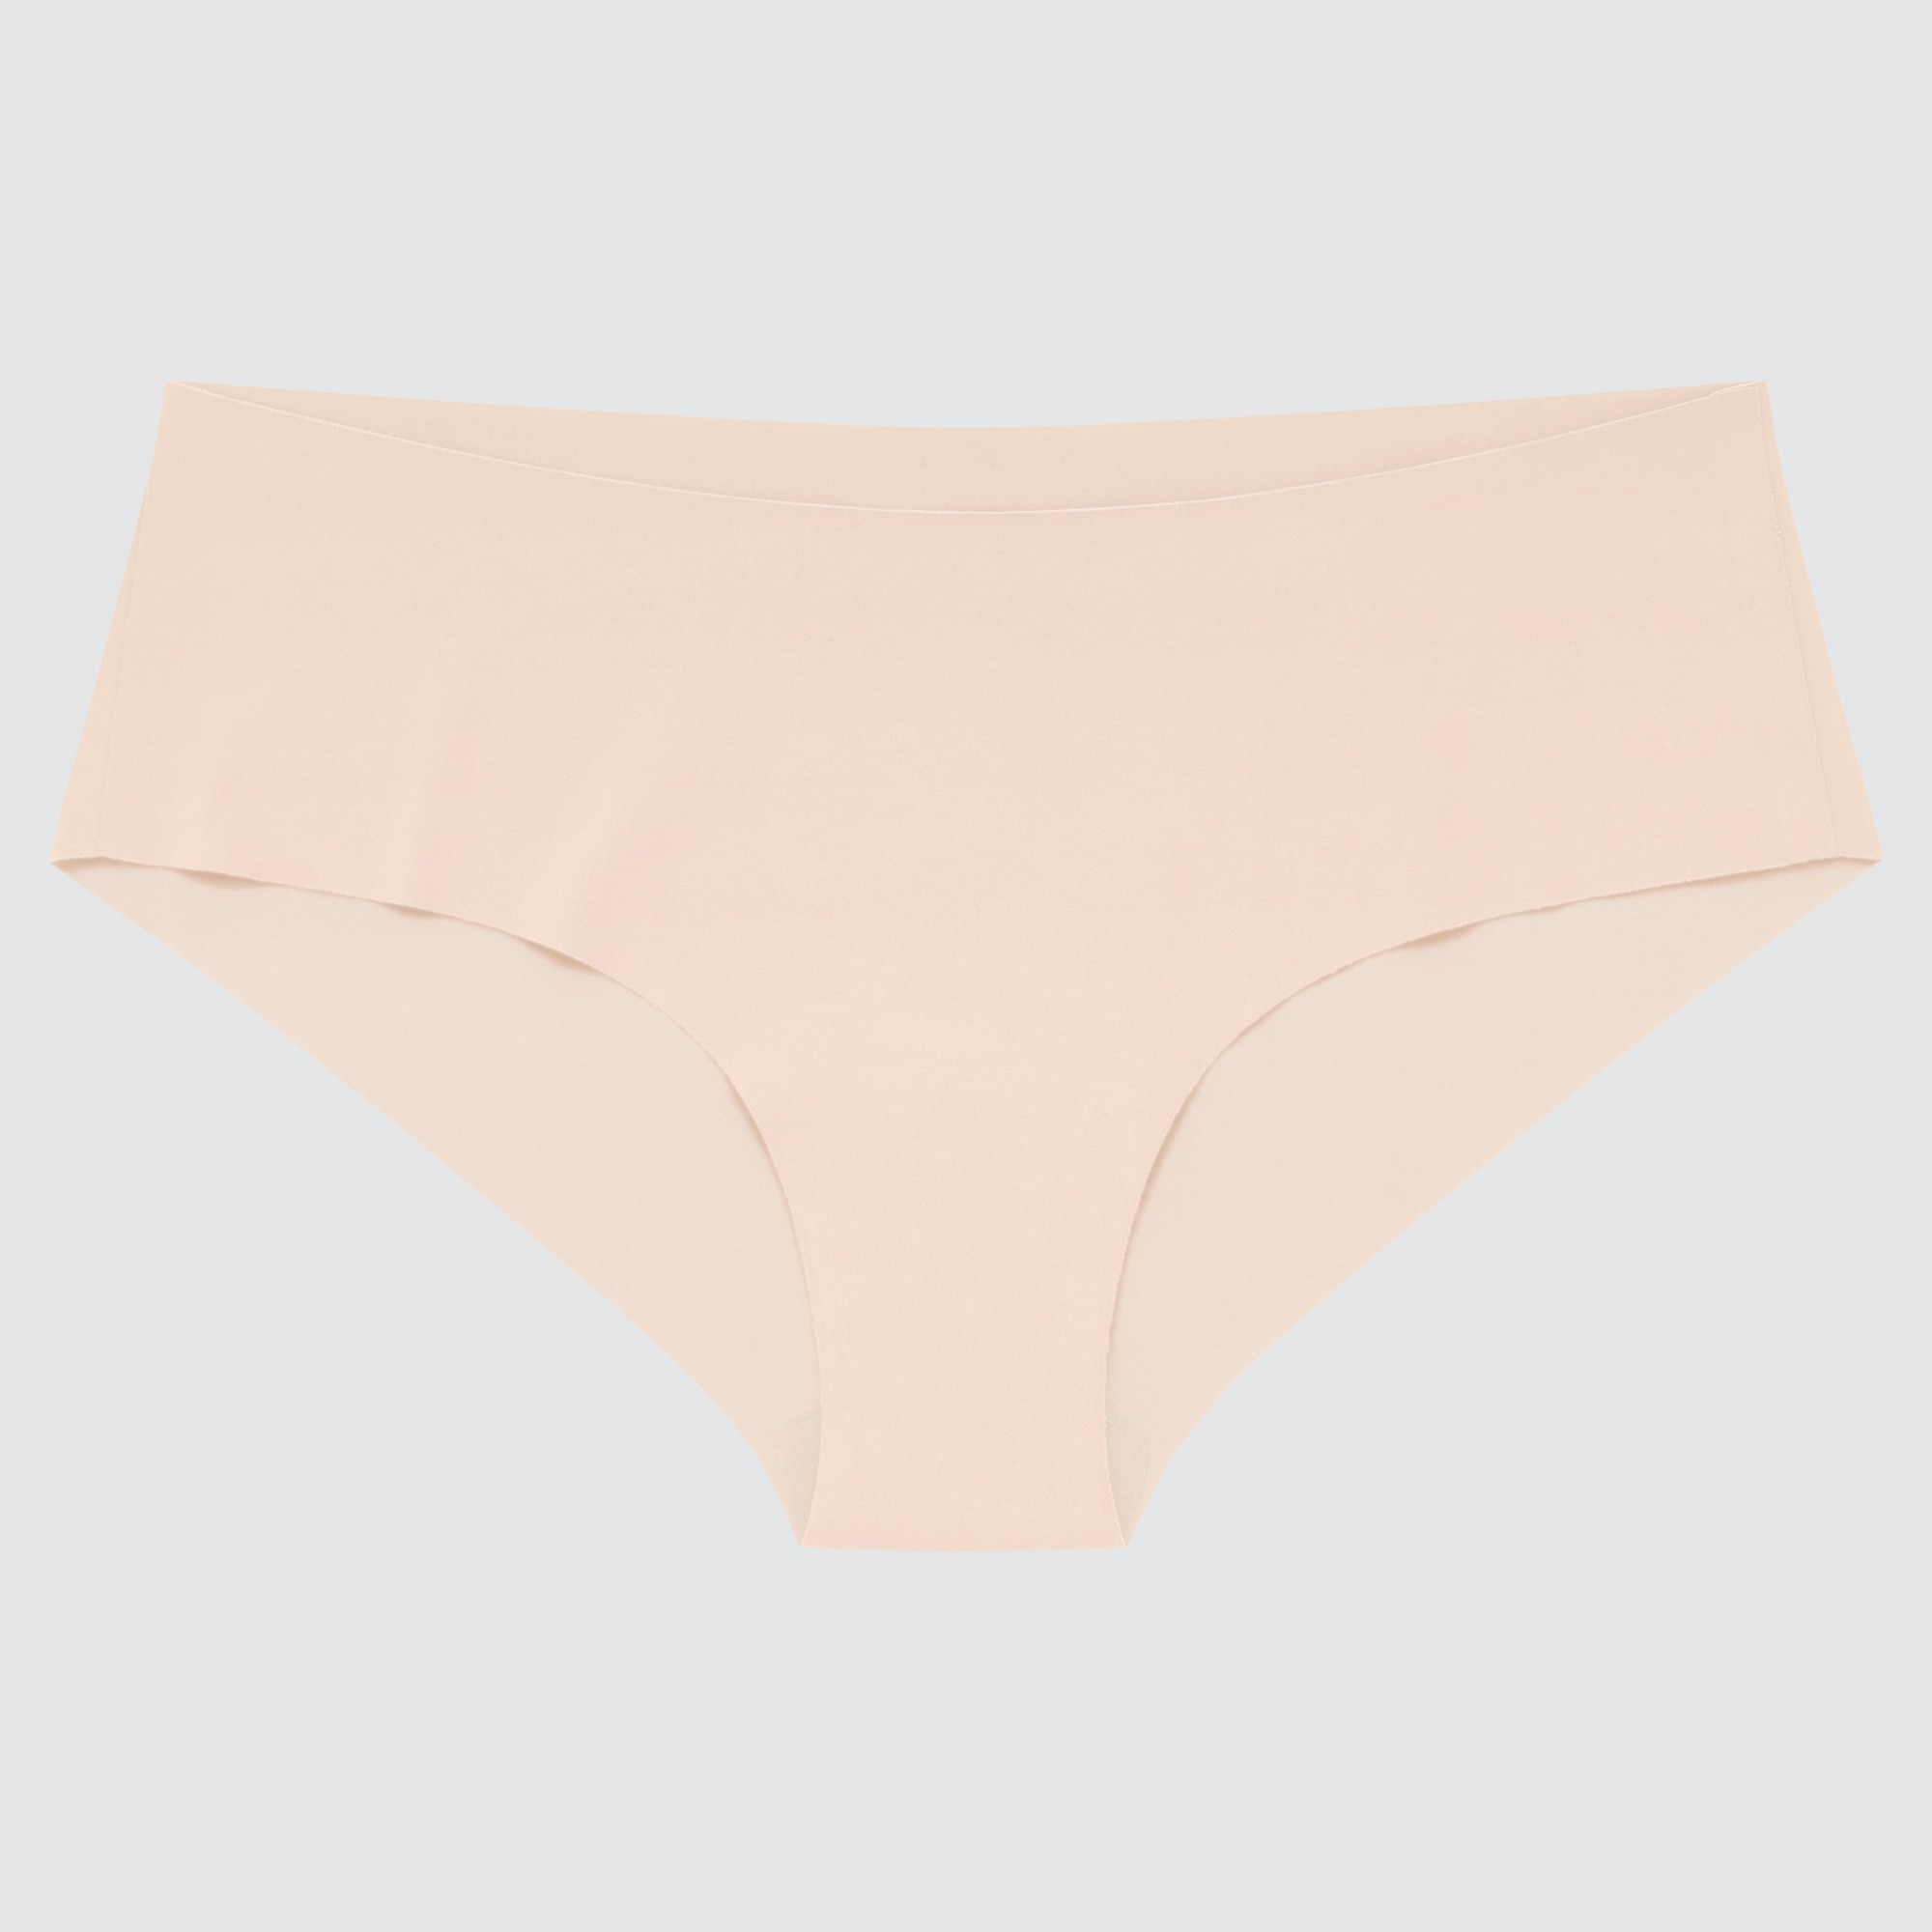 WOMENS AIRISM ULTRA SEAMLESS SHORTS HIPHUGGER  UNIQLO VN